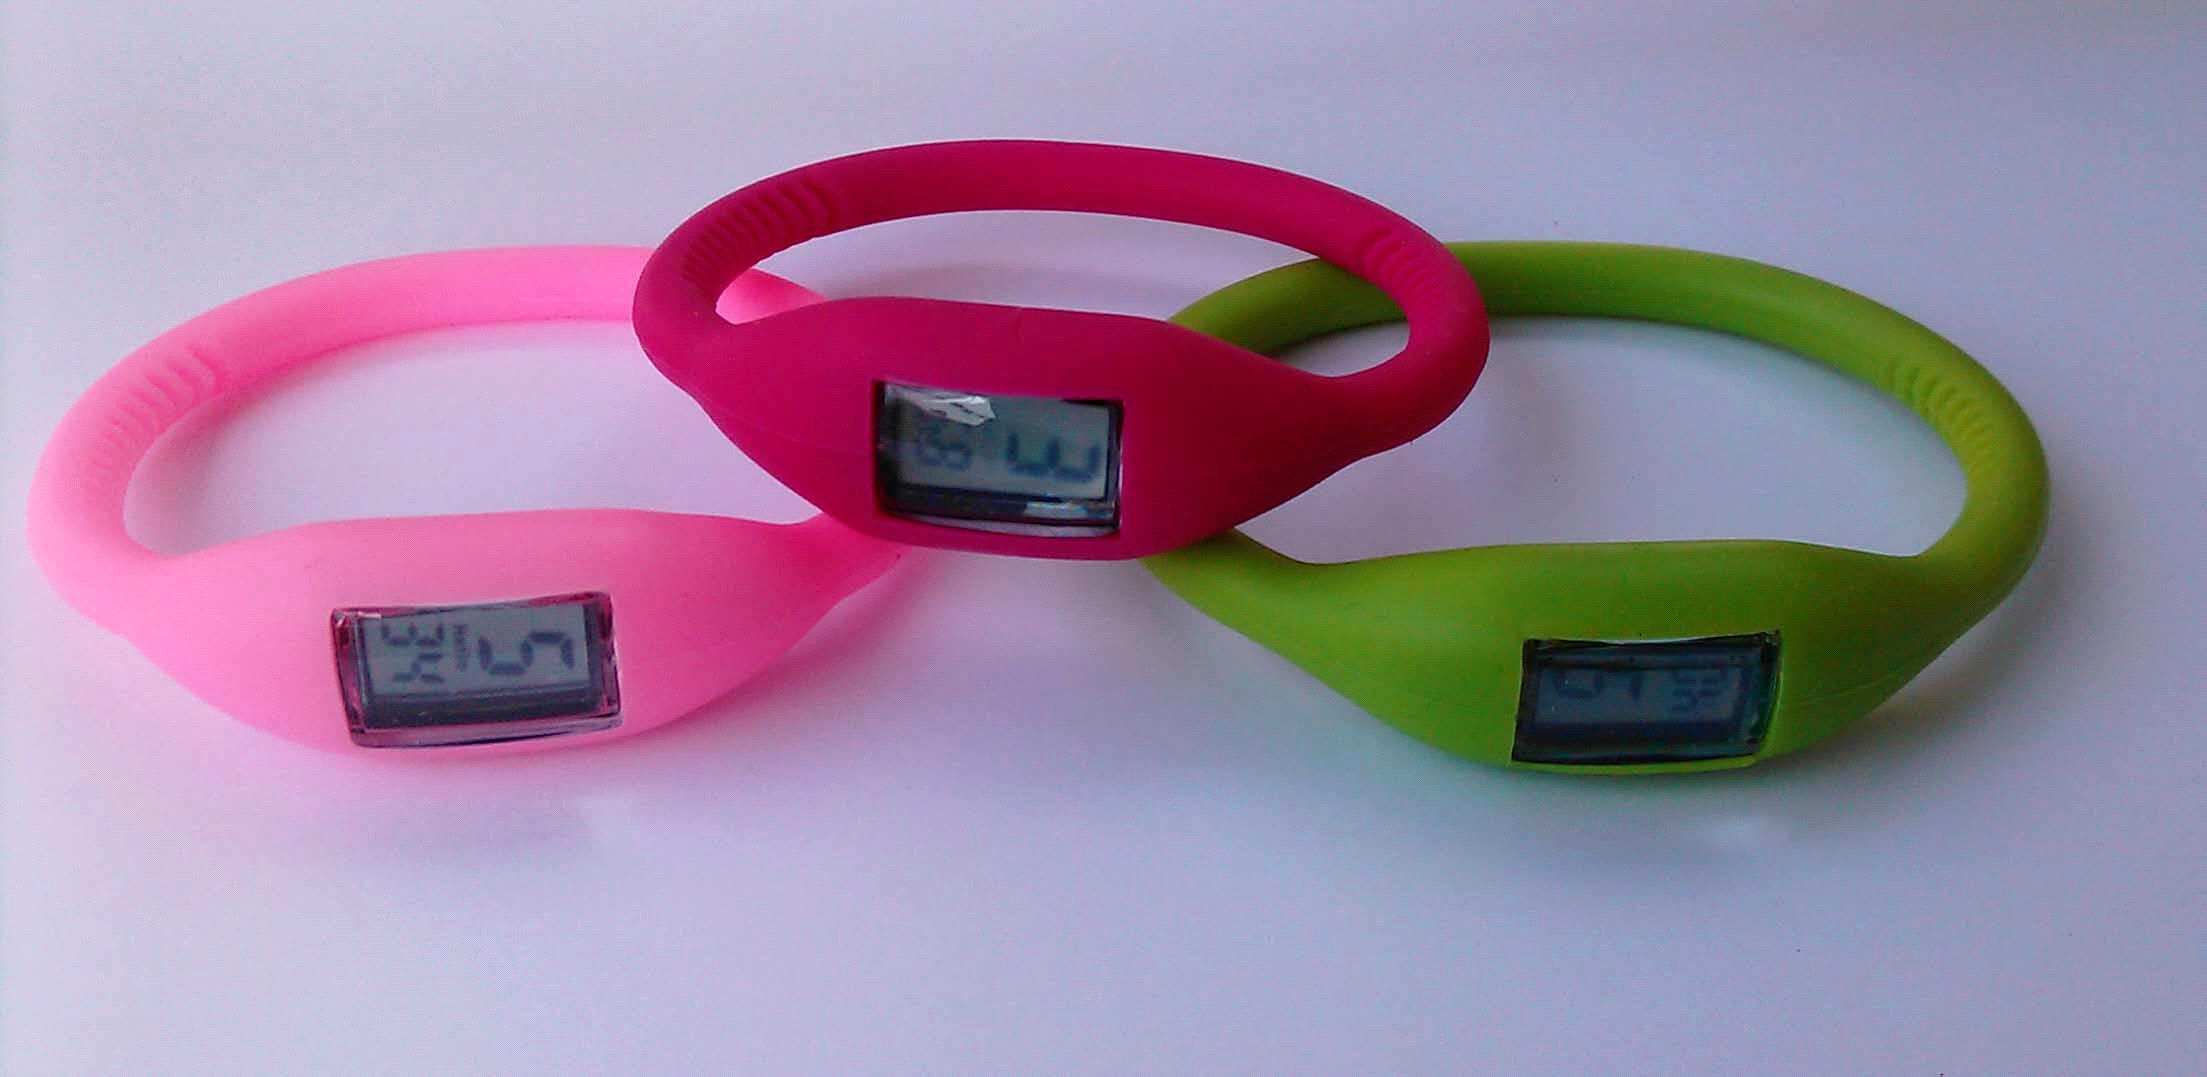 China_shapd_rubber_band_with_digital_watch20114241707468.jpg